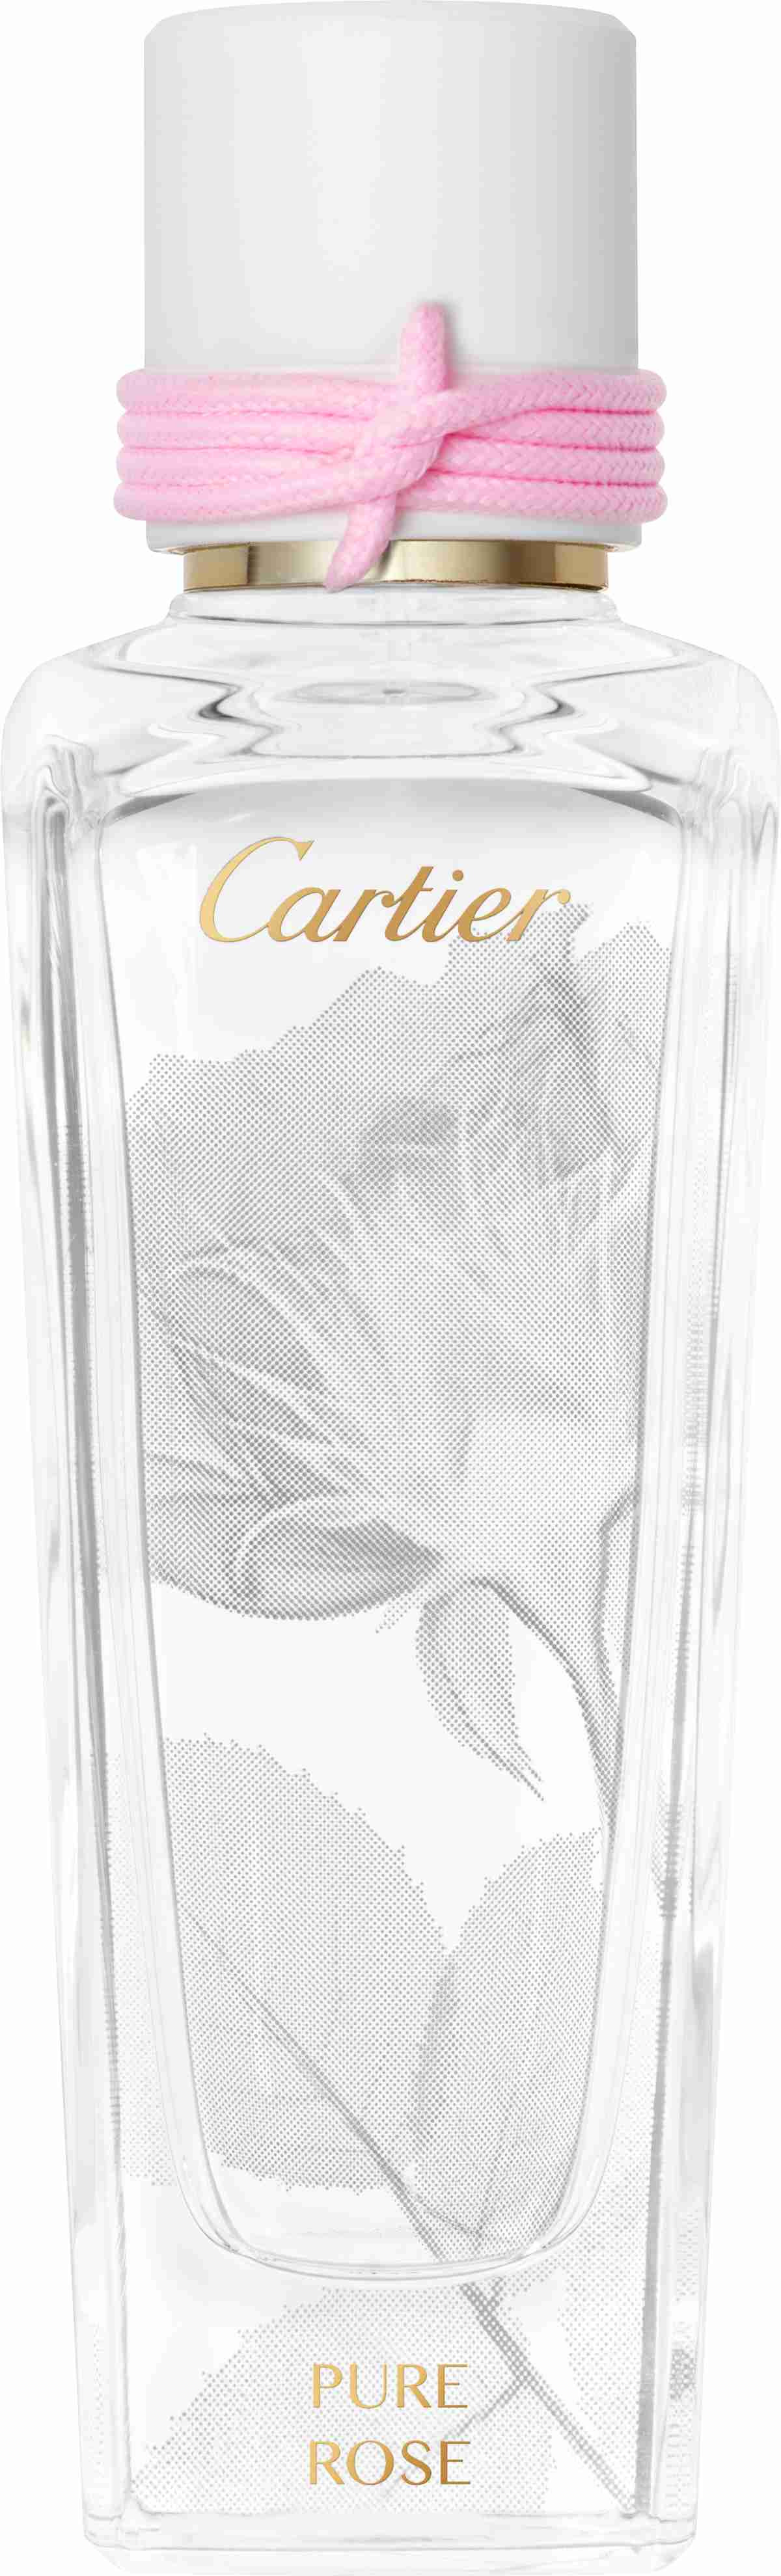 Mother's day gift inspiration presented by Cartier